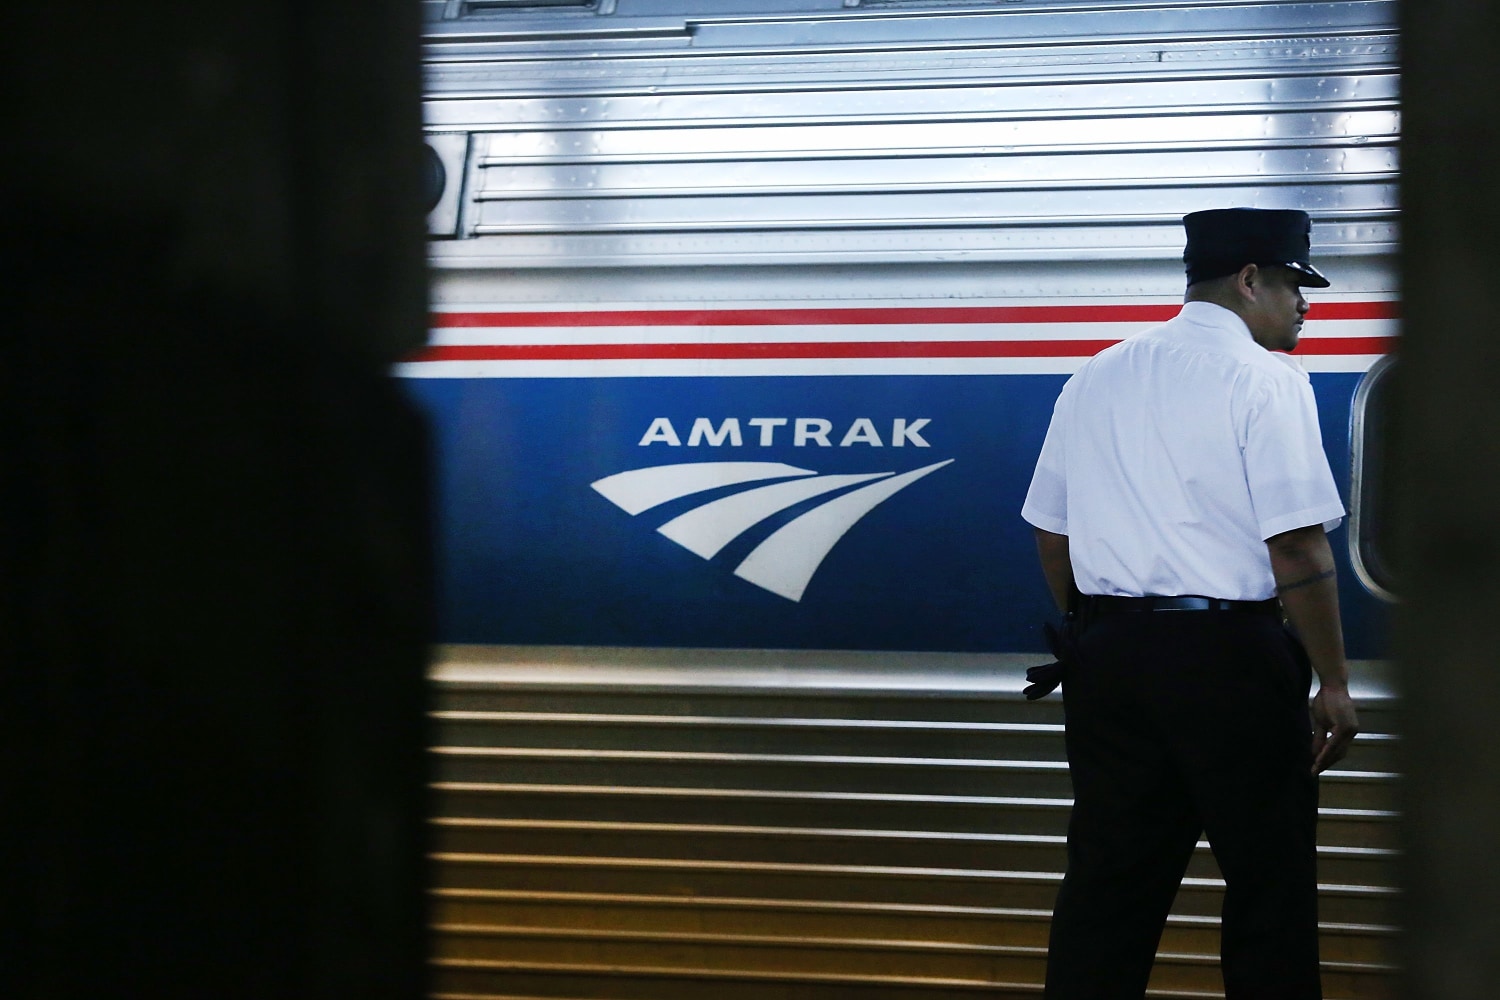 Child is among 3 dead after Amtrak train hits a pickup truck in upstate New York – NBC News